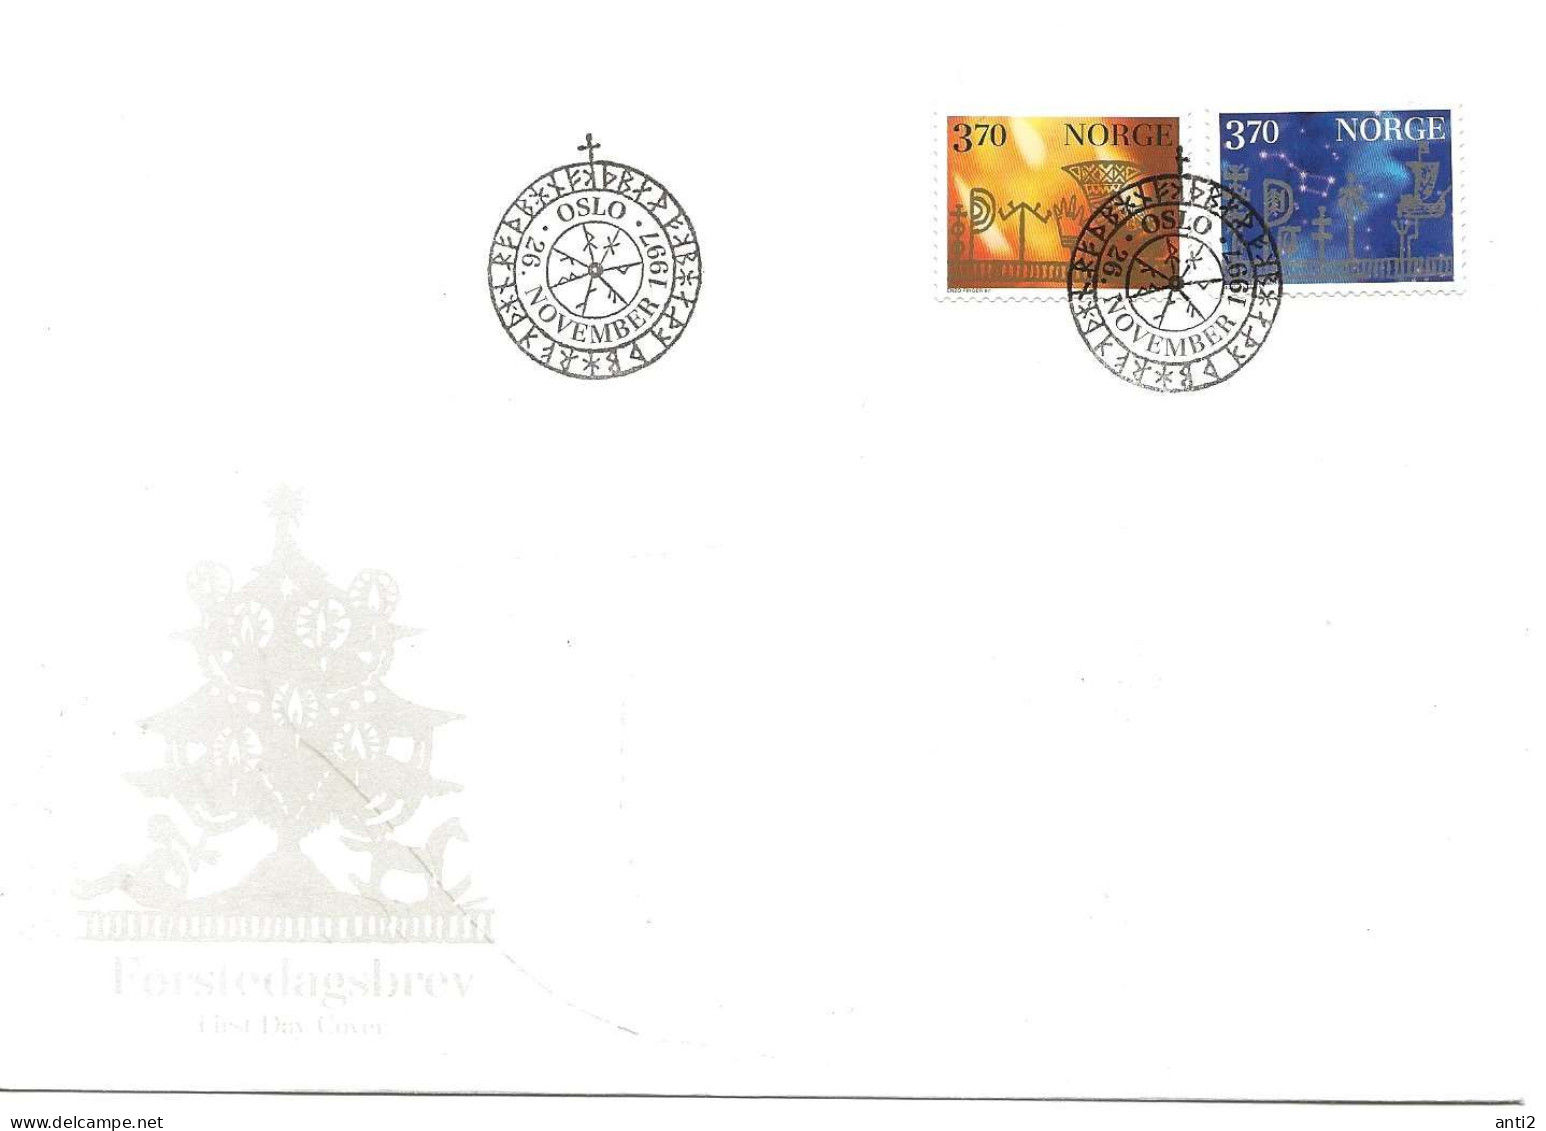 Norway Norge 1997  Christmas: Medieval Calendar Bars  1265 - 1266  FDC - Lettres & Documents